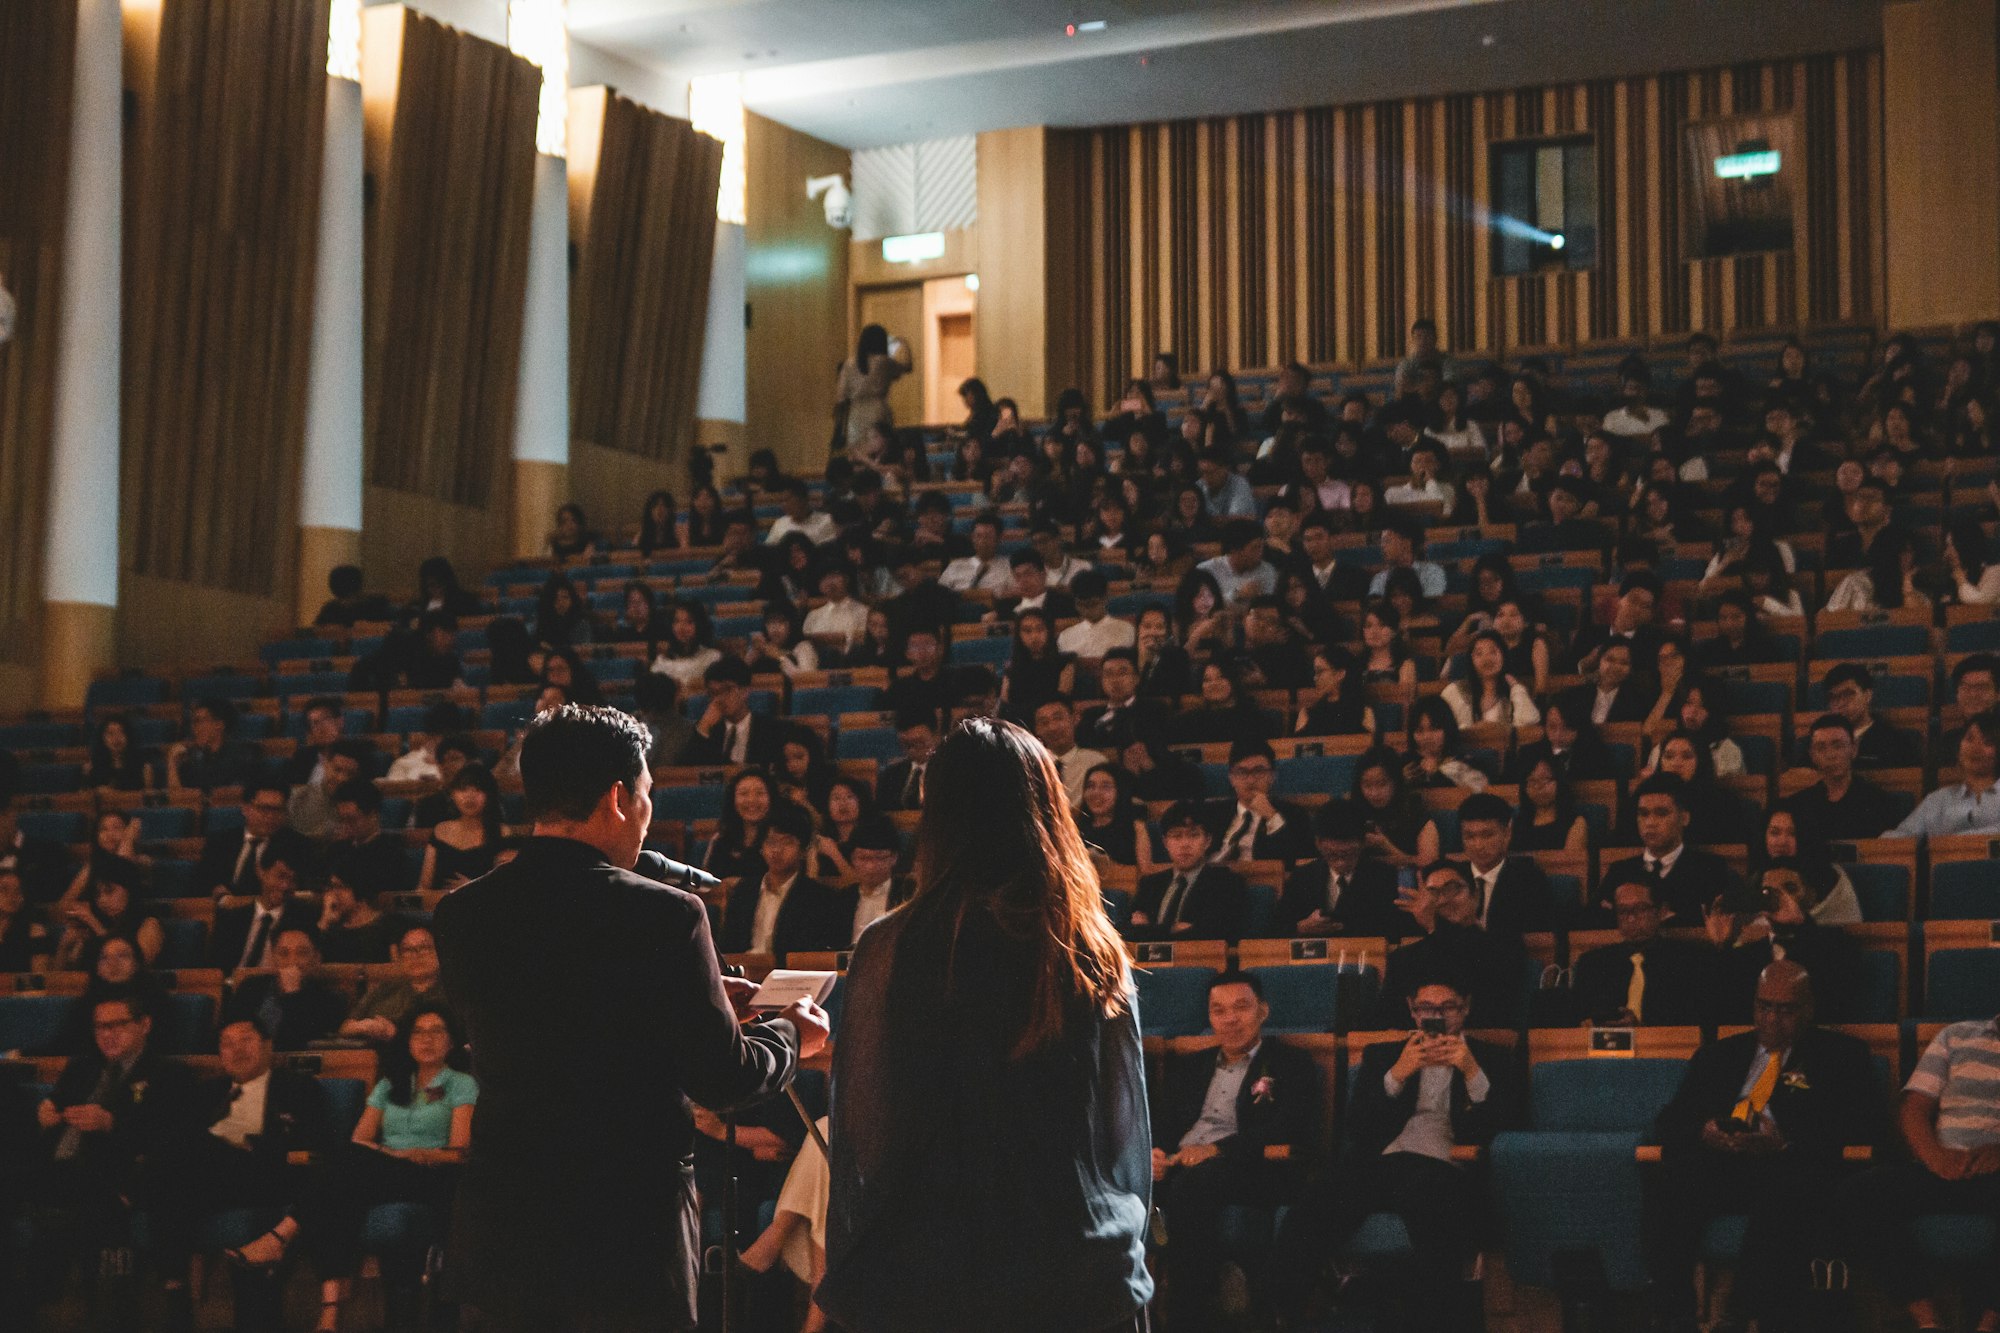 Presenting to a Diverse Audience? Here are some useful tips...